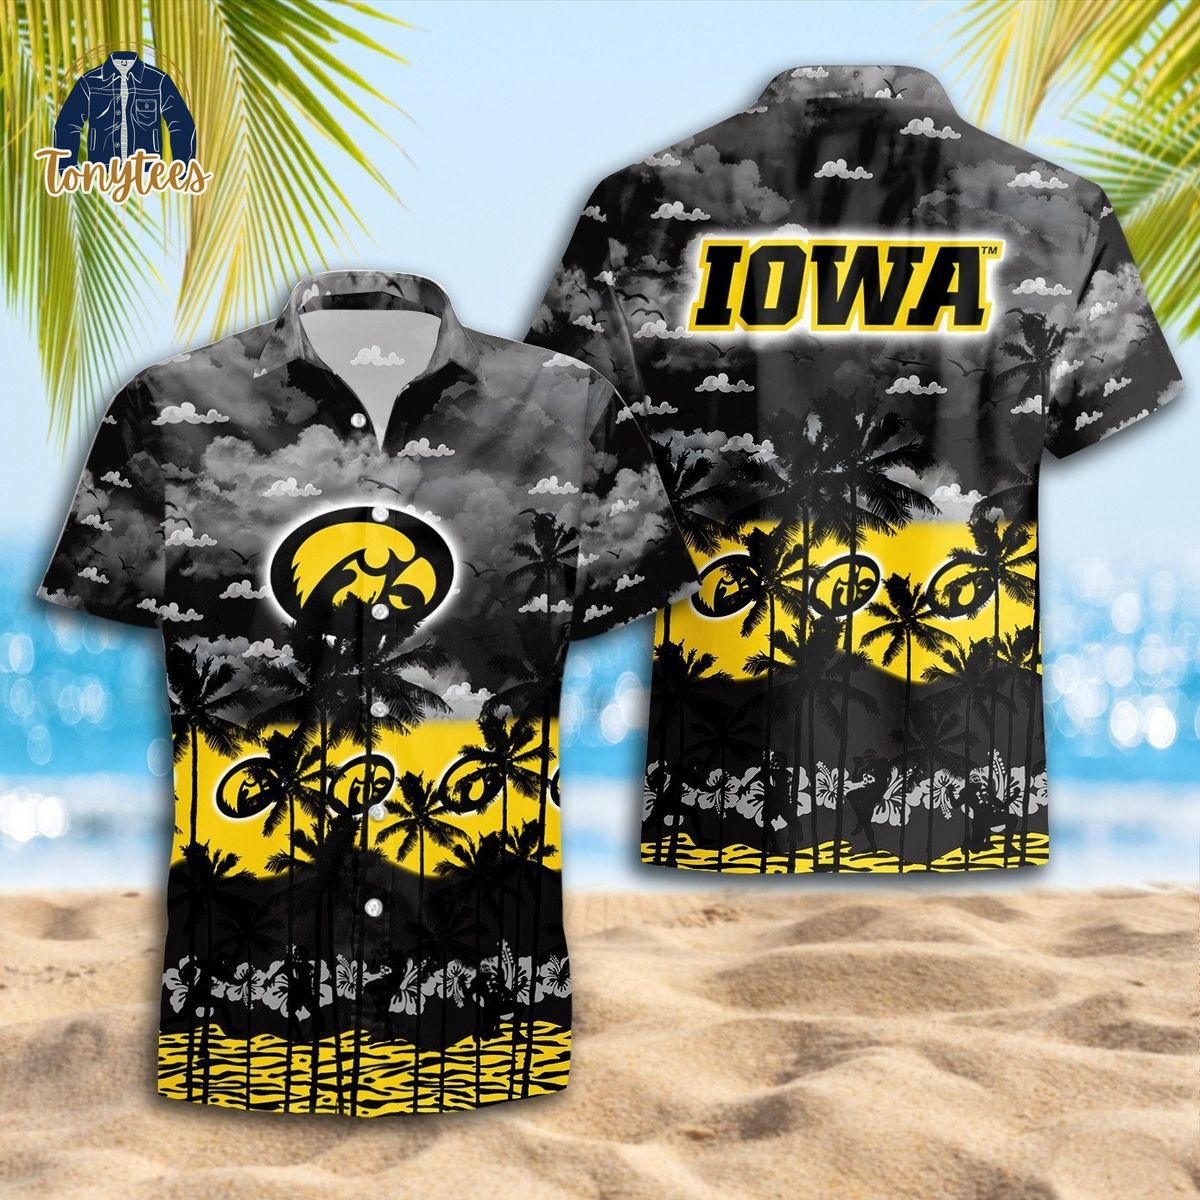 🏈🌺 Support the Iowa Hawkeyes in a unique way with our 3D Hawaii shirt! Perfect for game days and beyond. Get yours now at Toneytees store! #IowaHawkeyes #Football #HawaiiShirt
Buy here: tonytees.com/product/iowa-h…